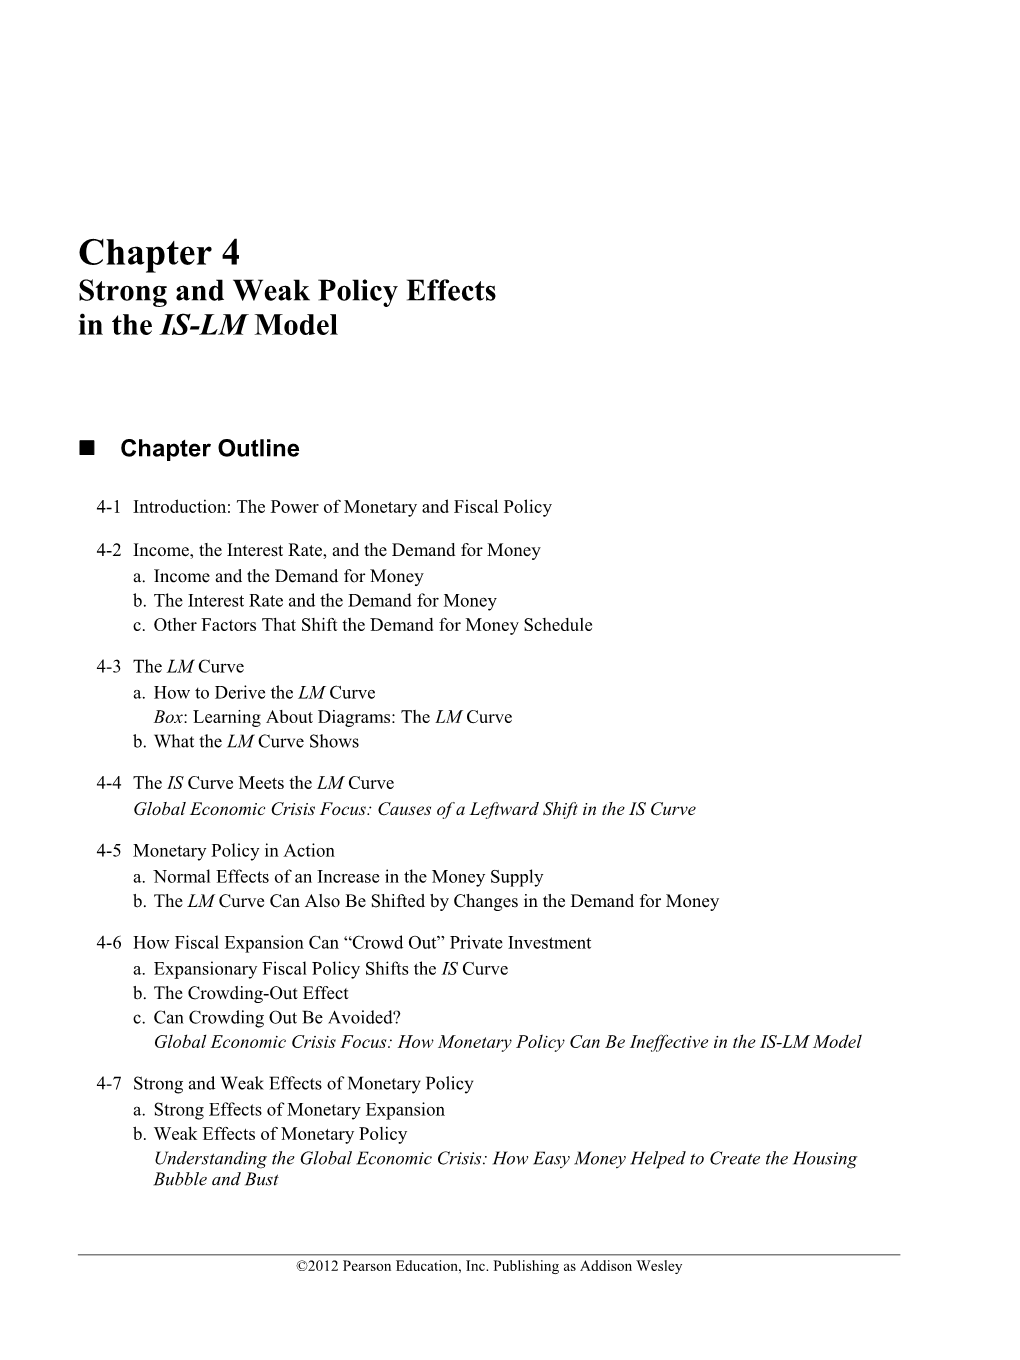 Chapter 4 Strong and Weak Policy Effects in the IS-LM Model